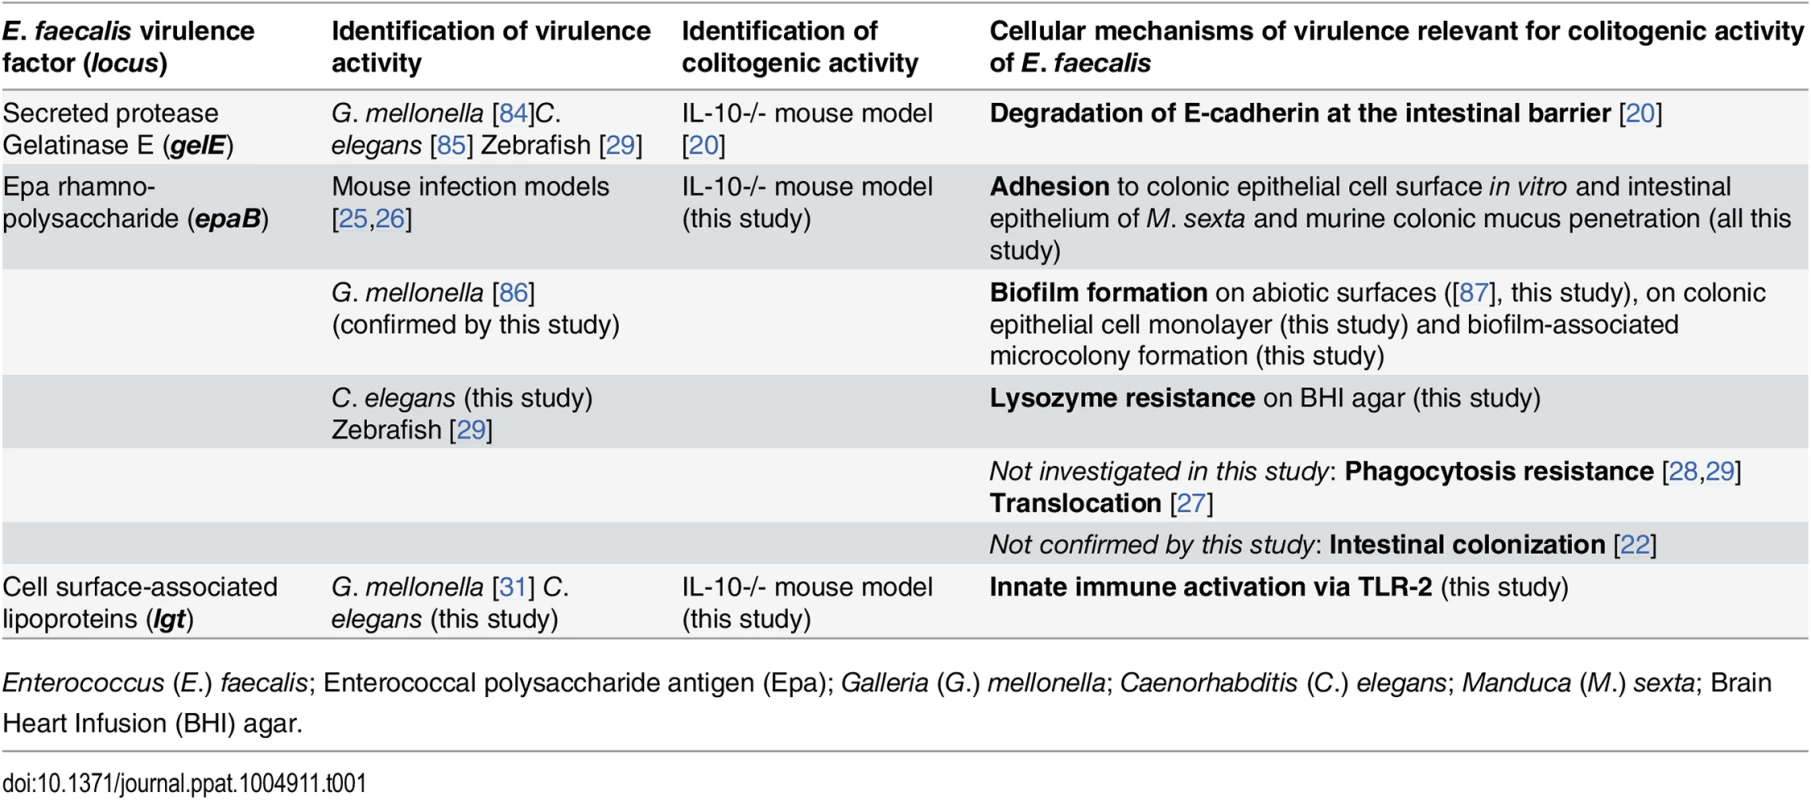 Virulence factors identified to be relevant for colitogenic activity of <i>E</i>. <i>faecalis</i> in the IL-10-/- mouse model and their proposed cellular mechanisms.